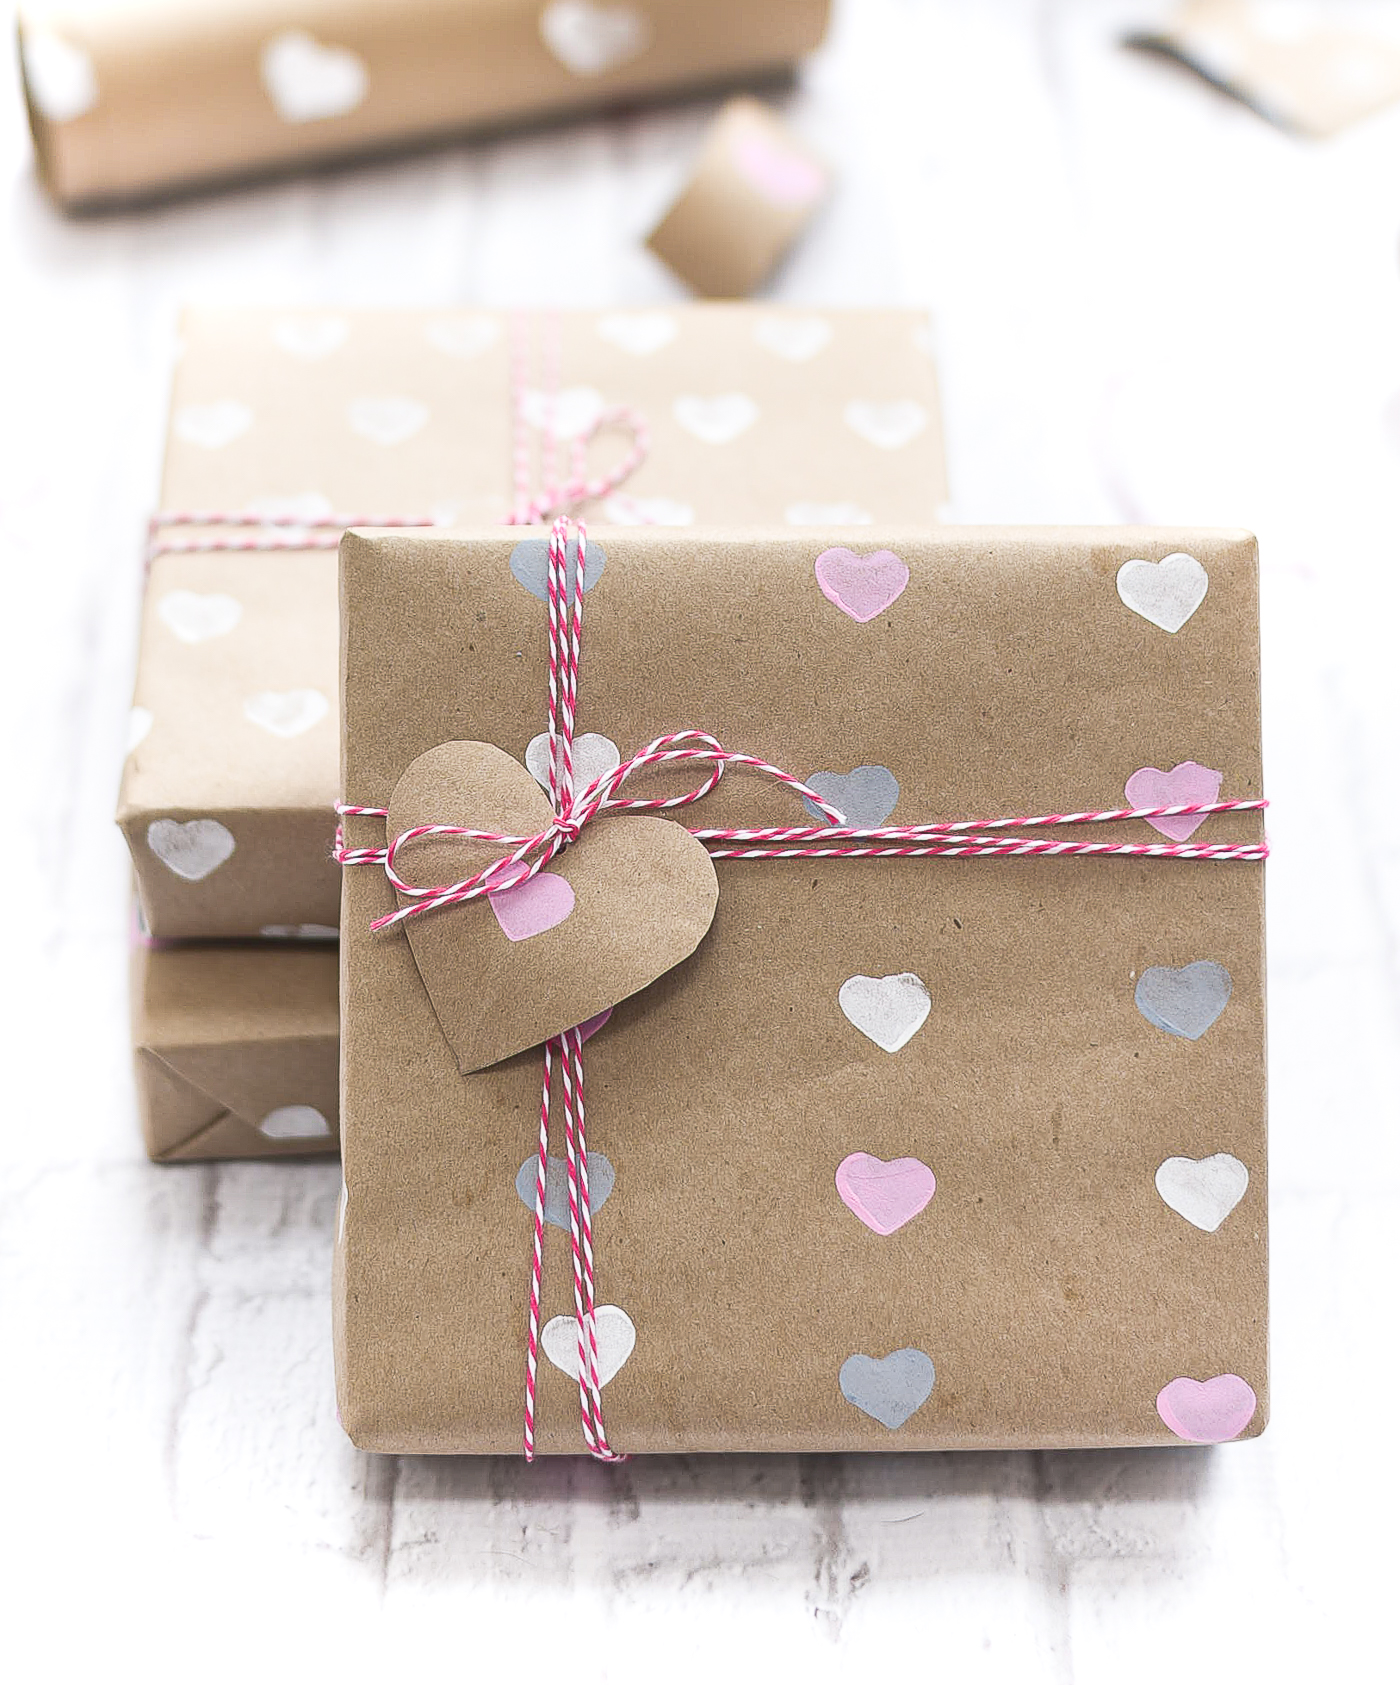 Valentine Day Wrapping Paper DIY - Homemade Wrapping Paper Tutorial for Valentine - Heart Wrapping Paper Made with Heart Stamps.